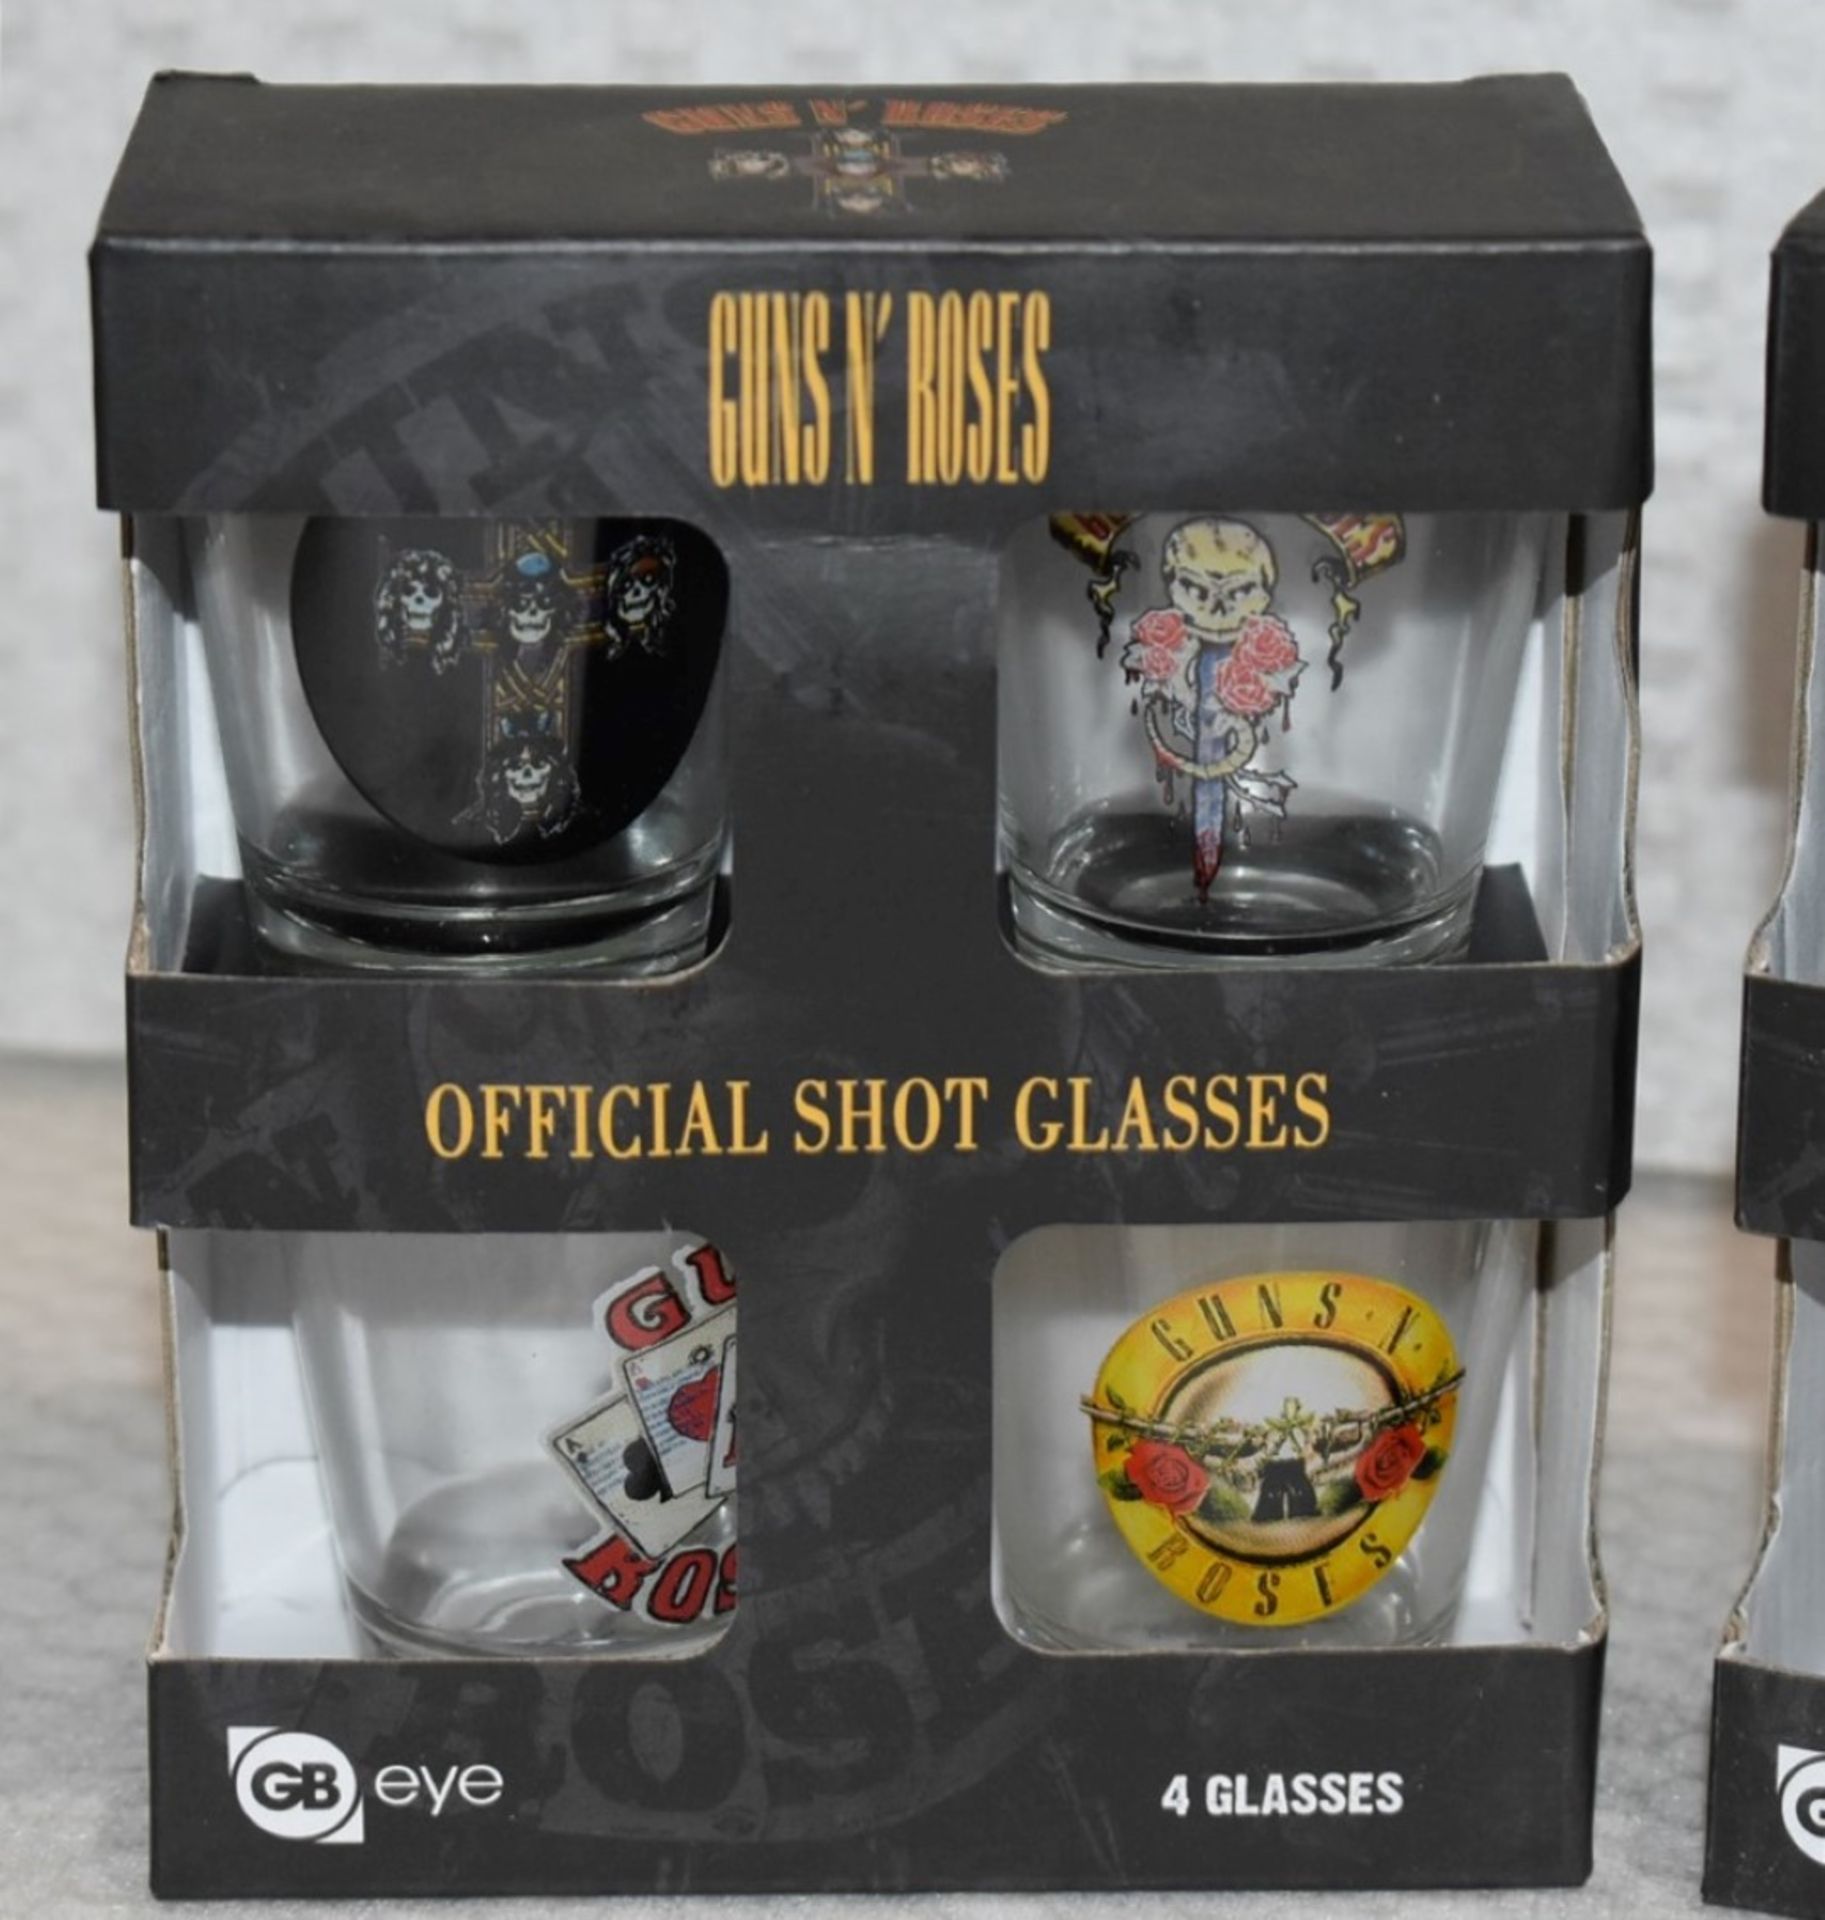 2 x Sets of Official Guns n Roses Shot Glass Gift Packs - Each Pack Contains 4 x 1oz Shot Glasses - - Image 2 of 5